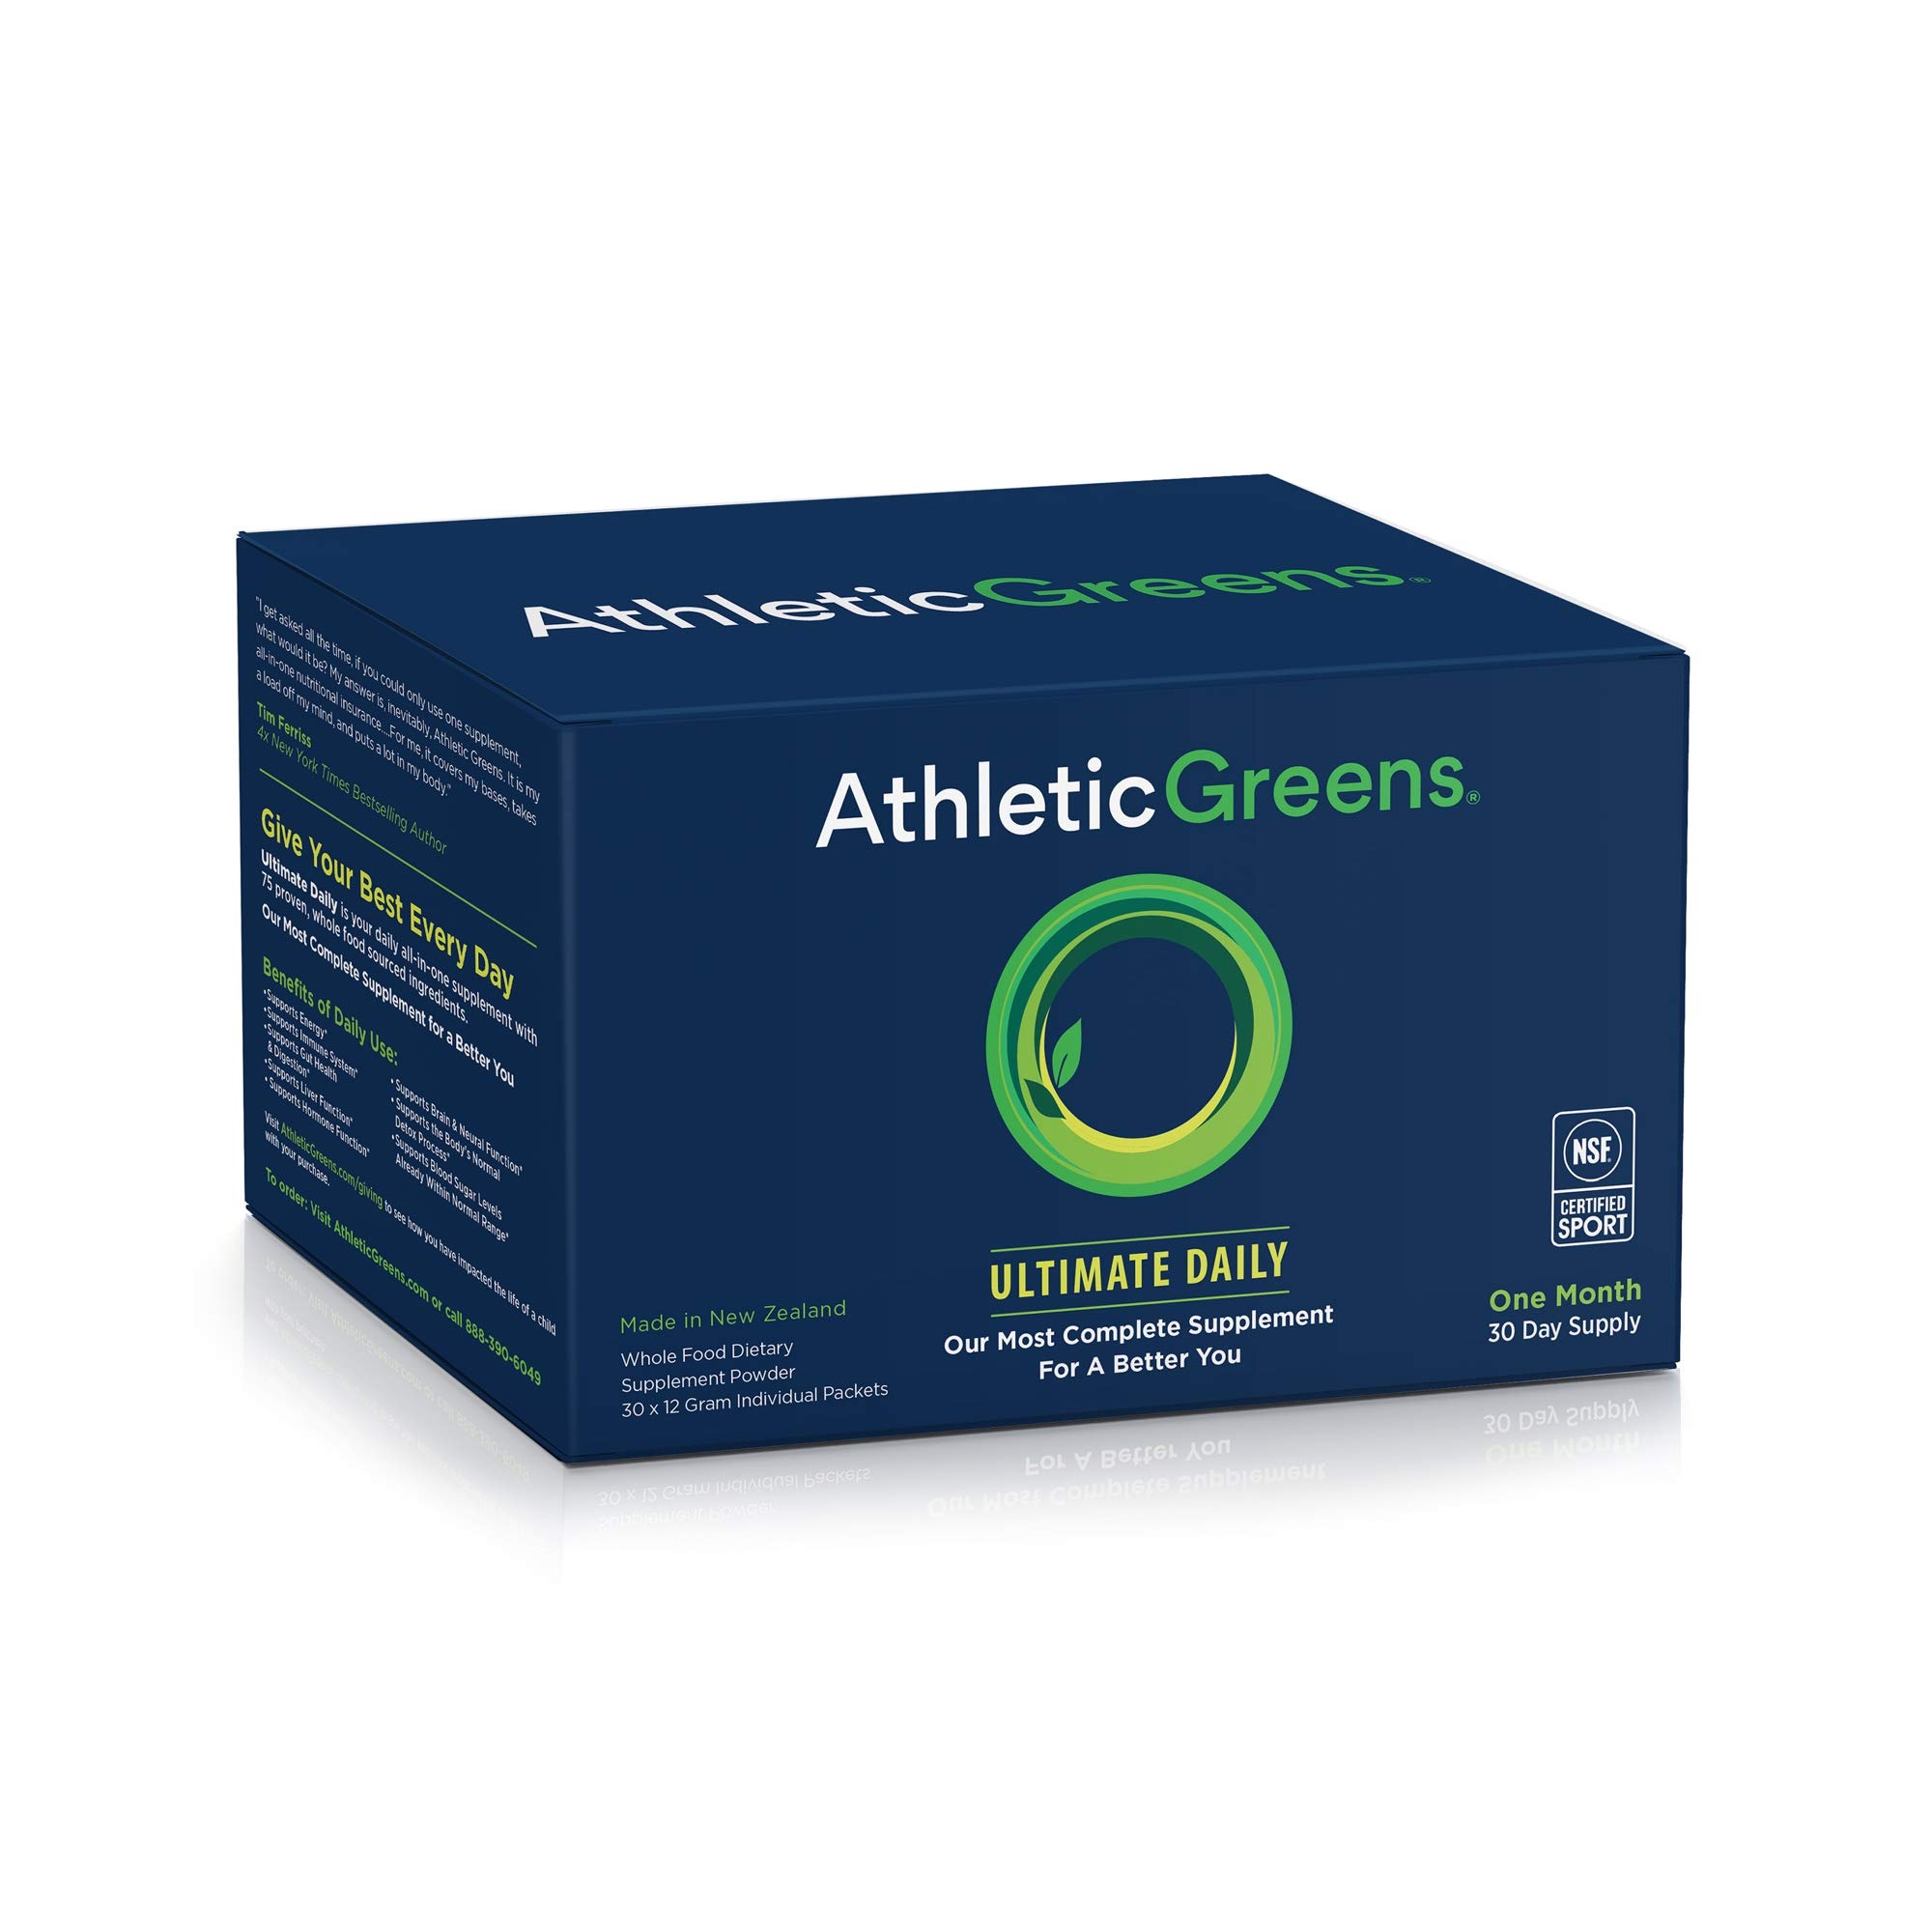 Athletic Greens Ultimate Daily, Whole Food Sourced All in One Greens Supplement, Superfood Powder, Gluten Free, Vegan and Keto Friendly,Travel Packs (Travel Packs, 30 Count)